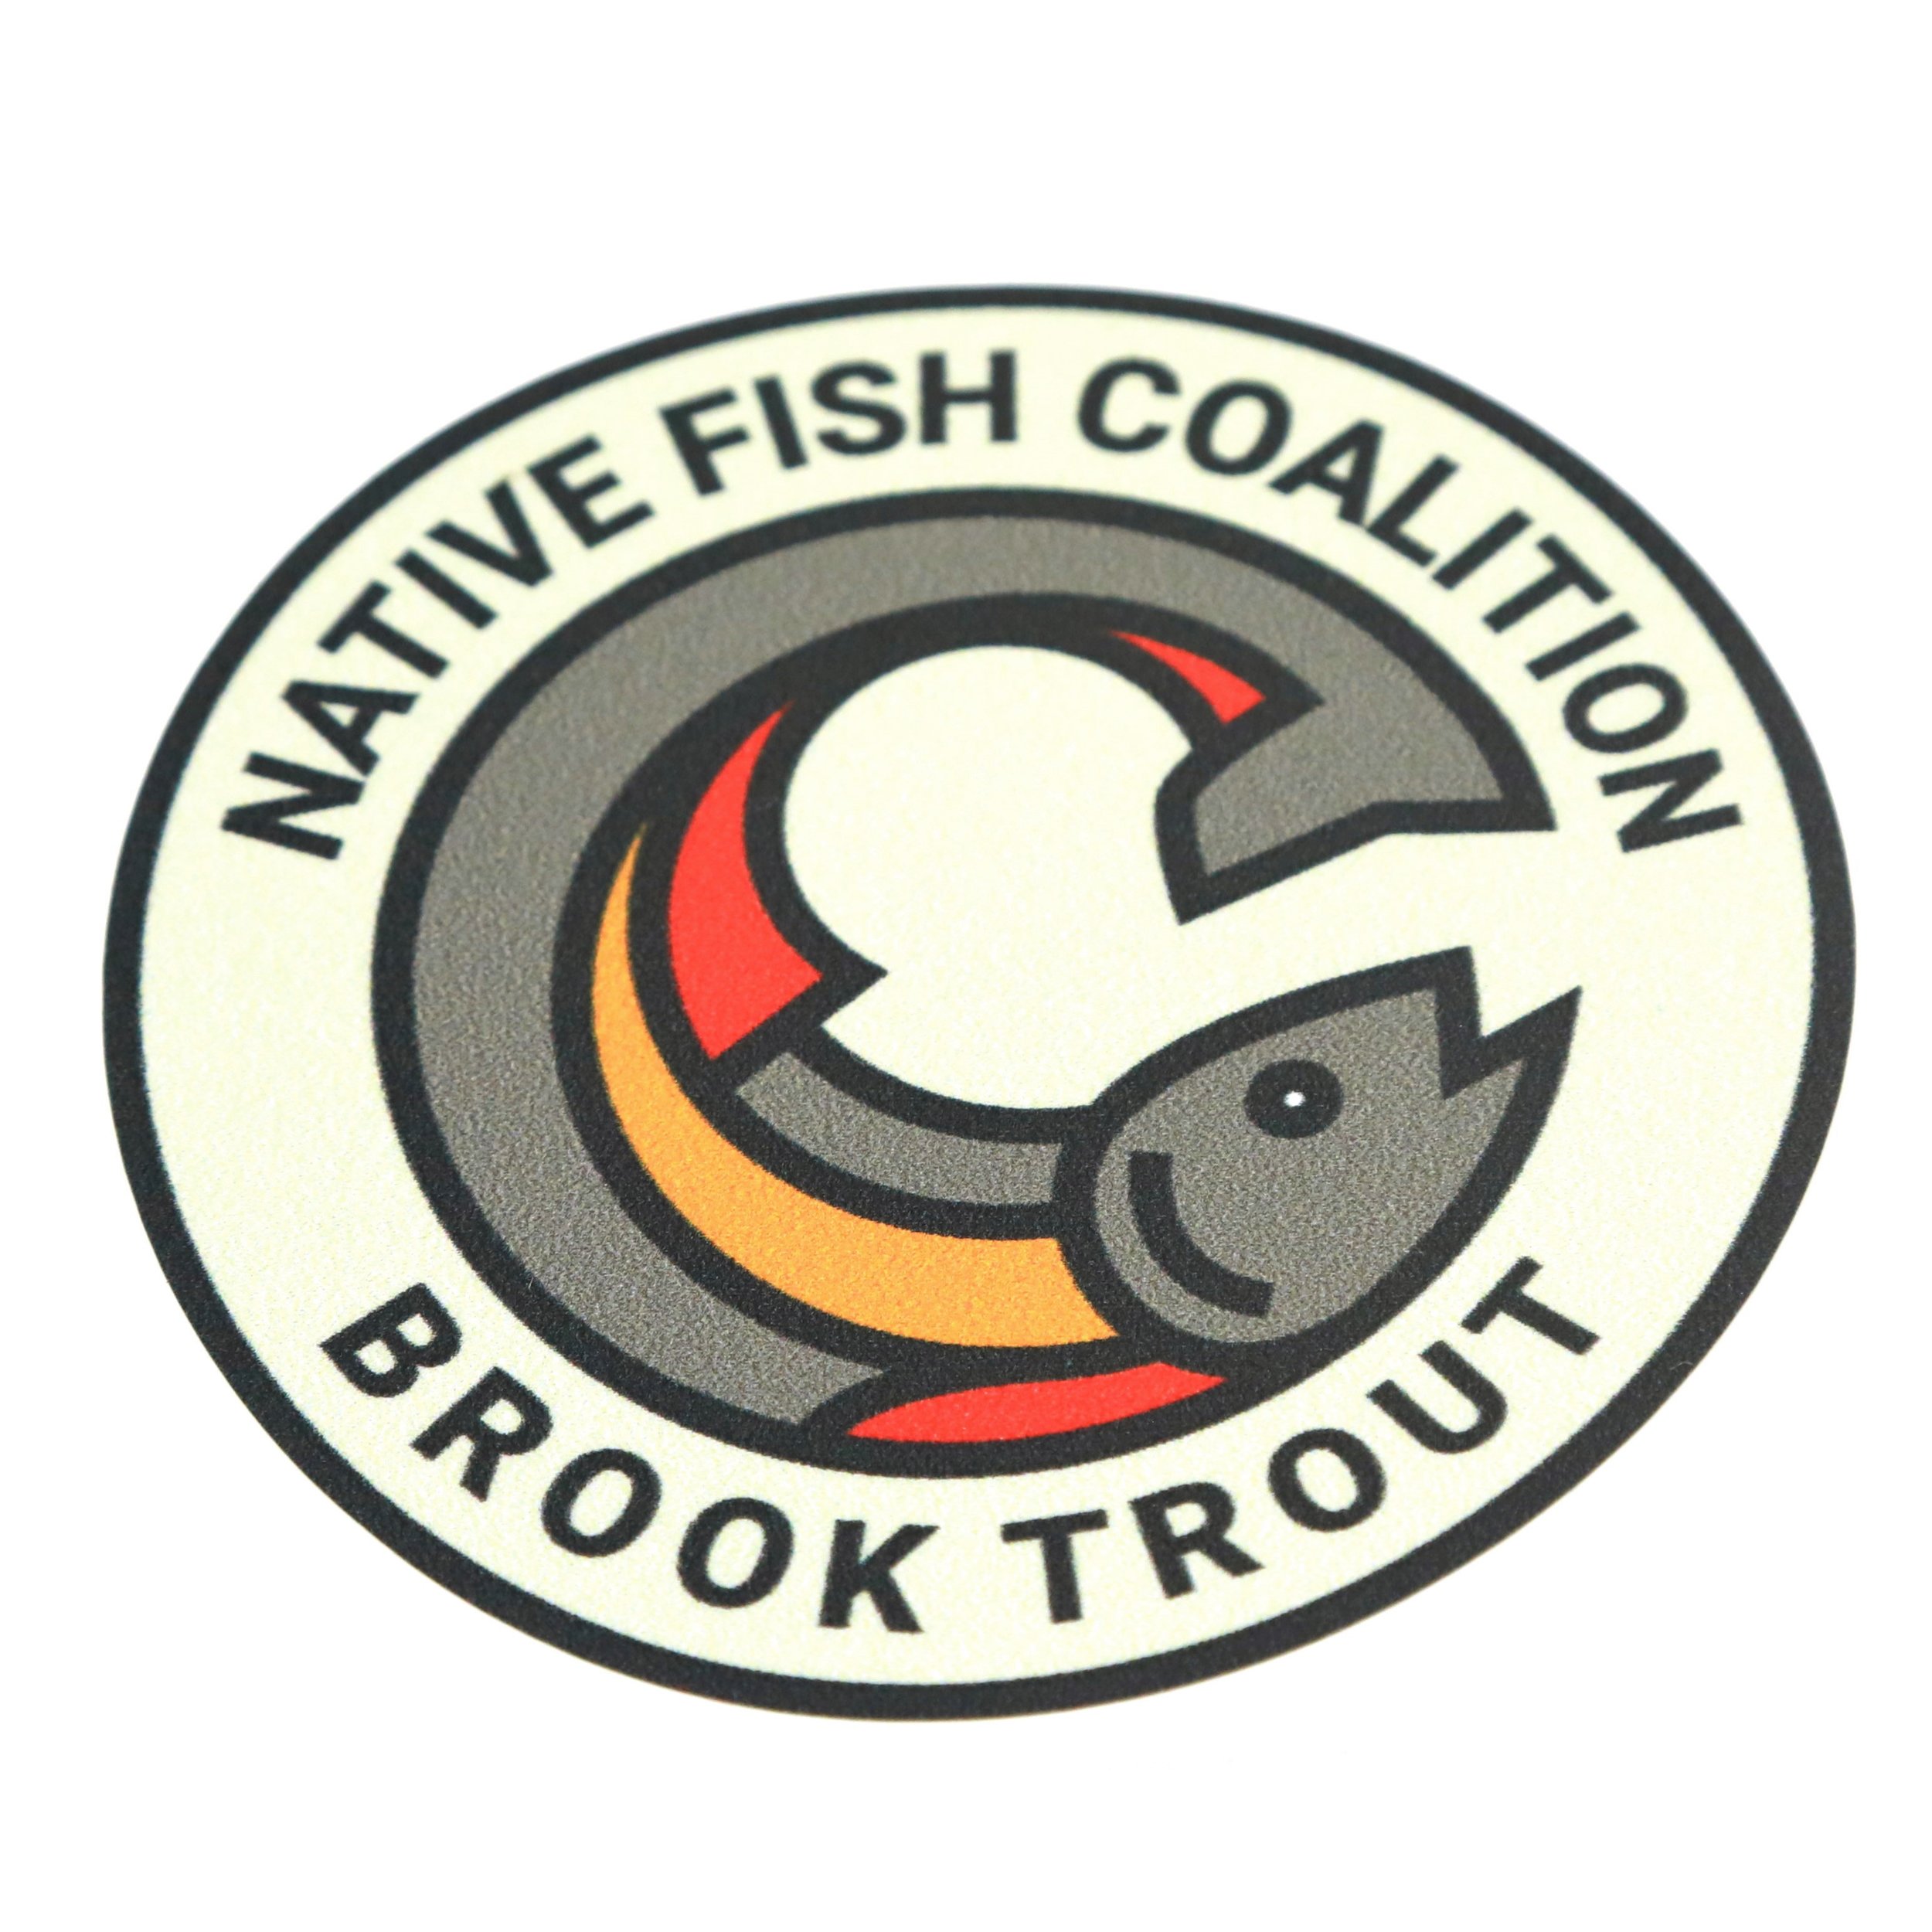 Decal - Brook Trout.JPG